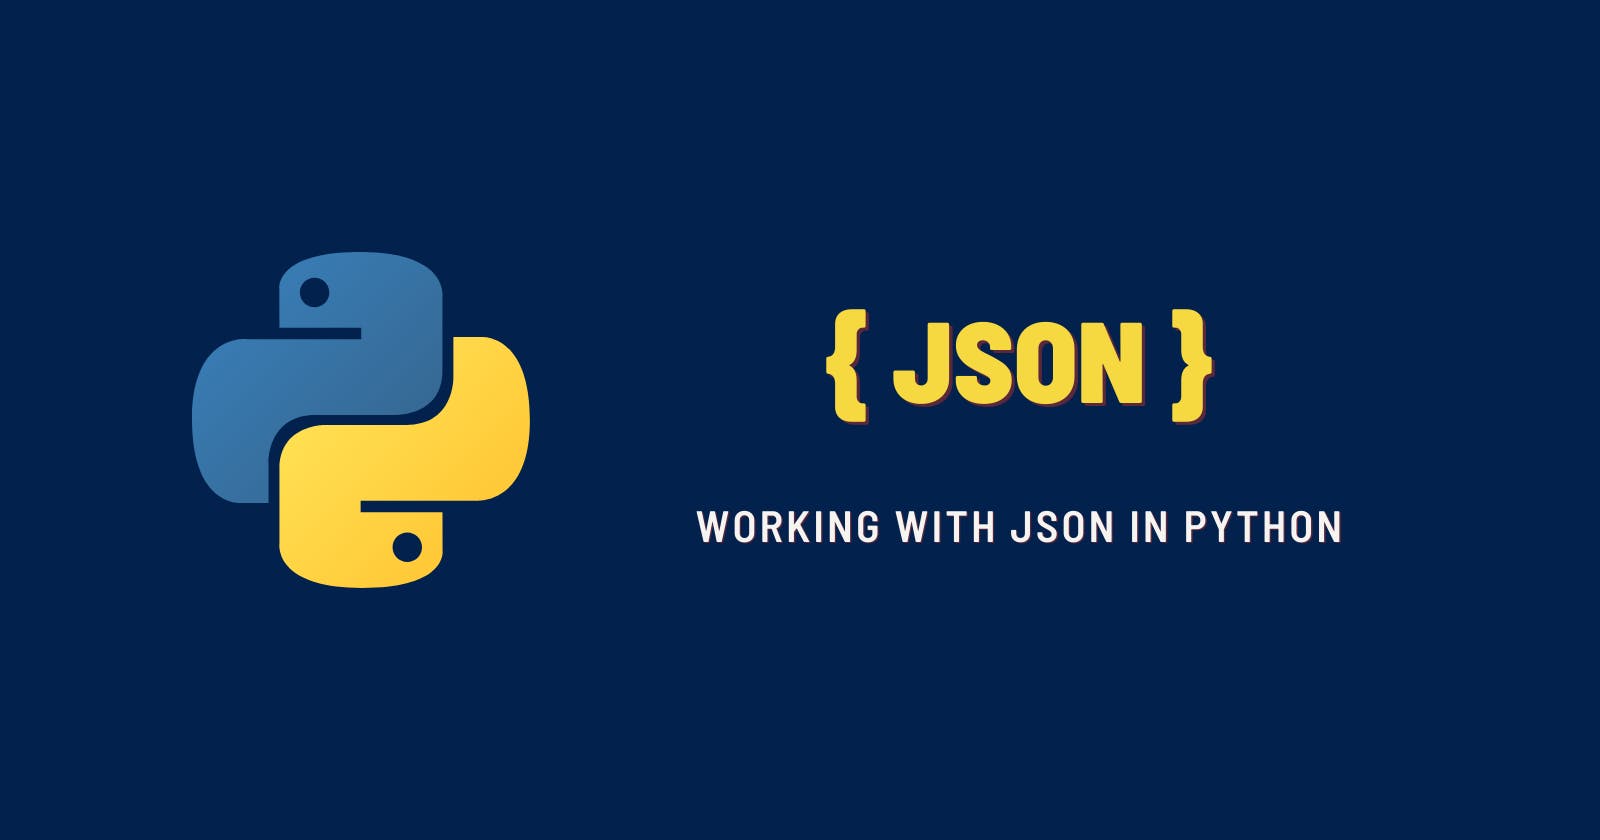 Working with JSON data in Python